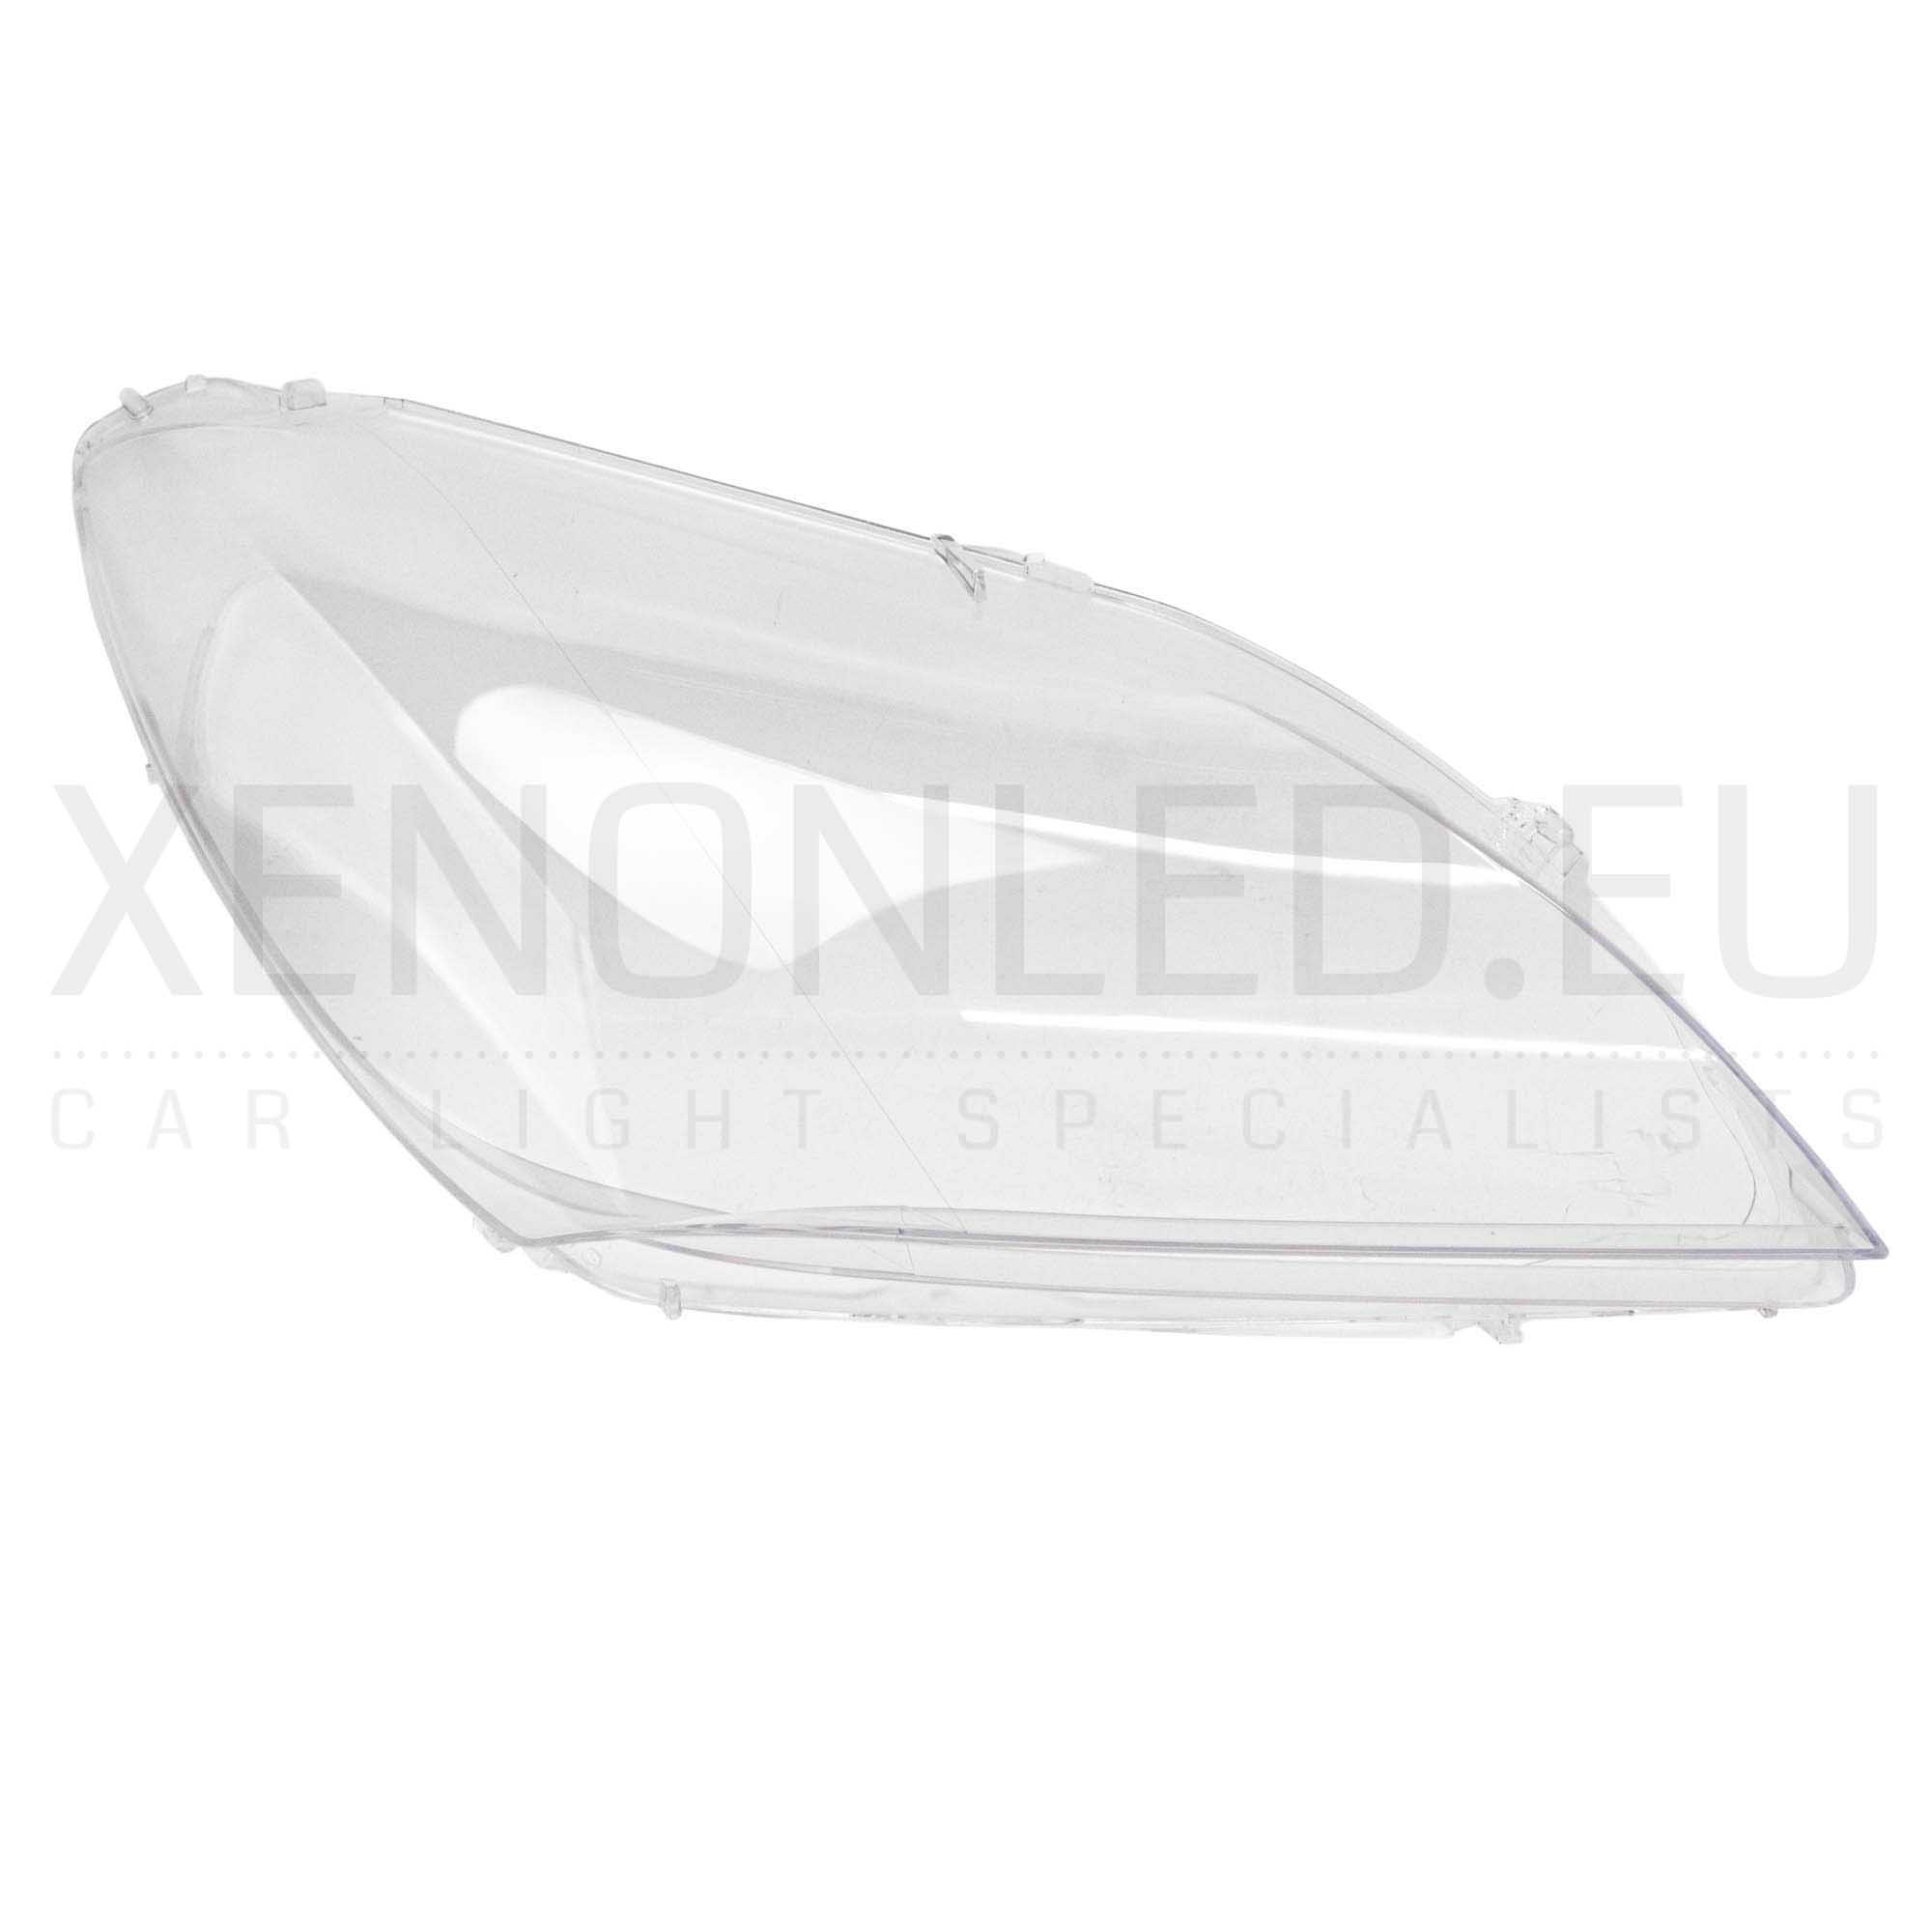 BMW 6 Series F12 F06 F13 2011 - 2013 Headlight Lens Cover Right Side ...